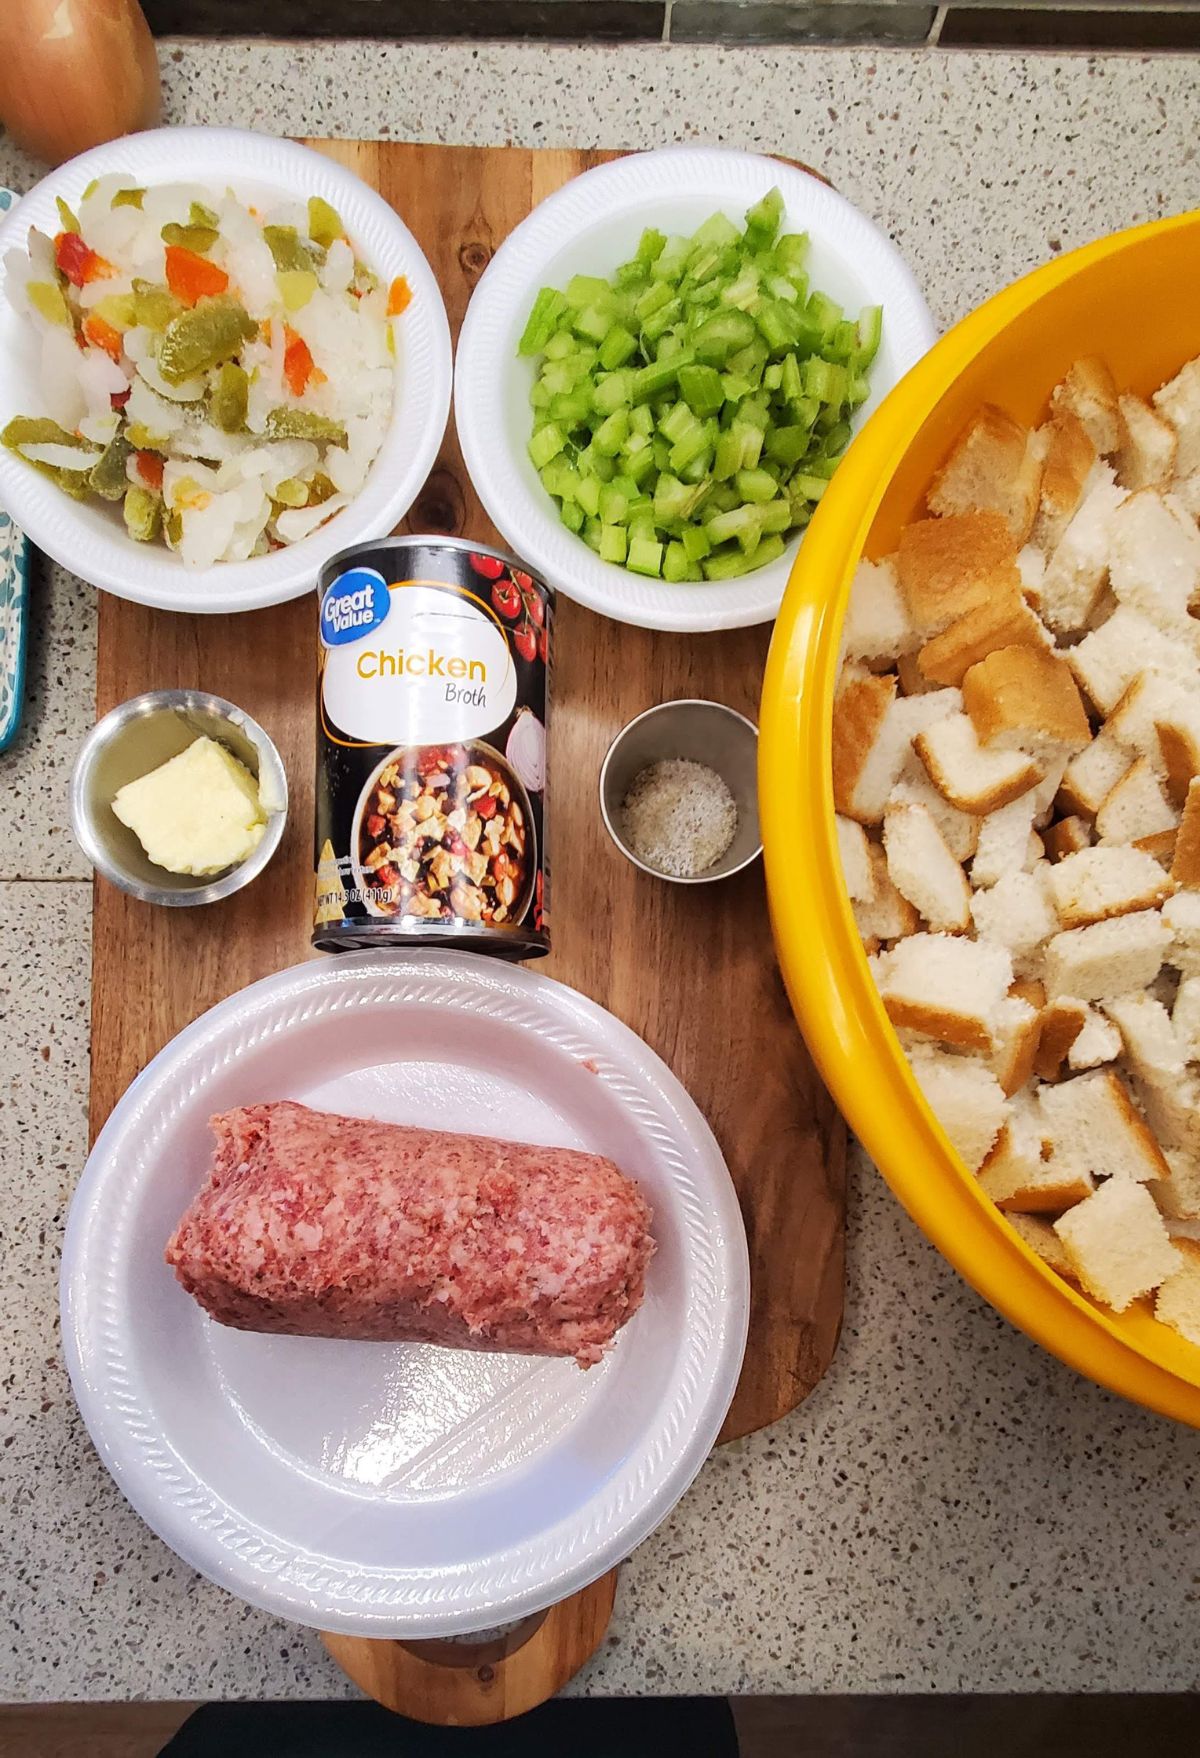 The ingredients for a meatloaf on a cutting board.